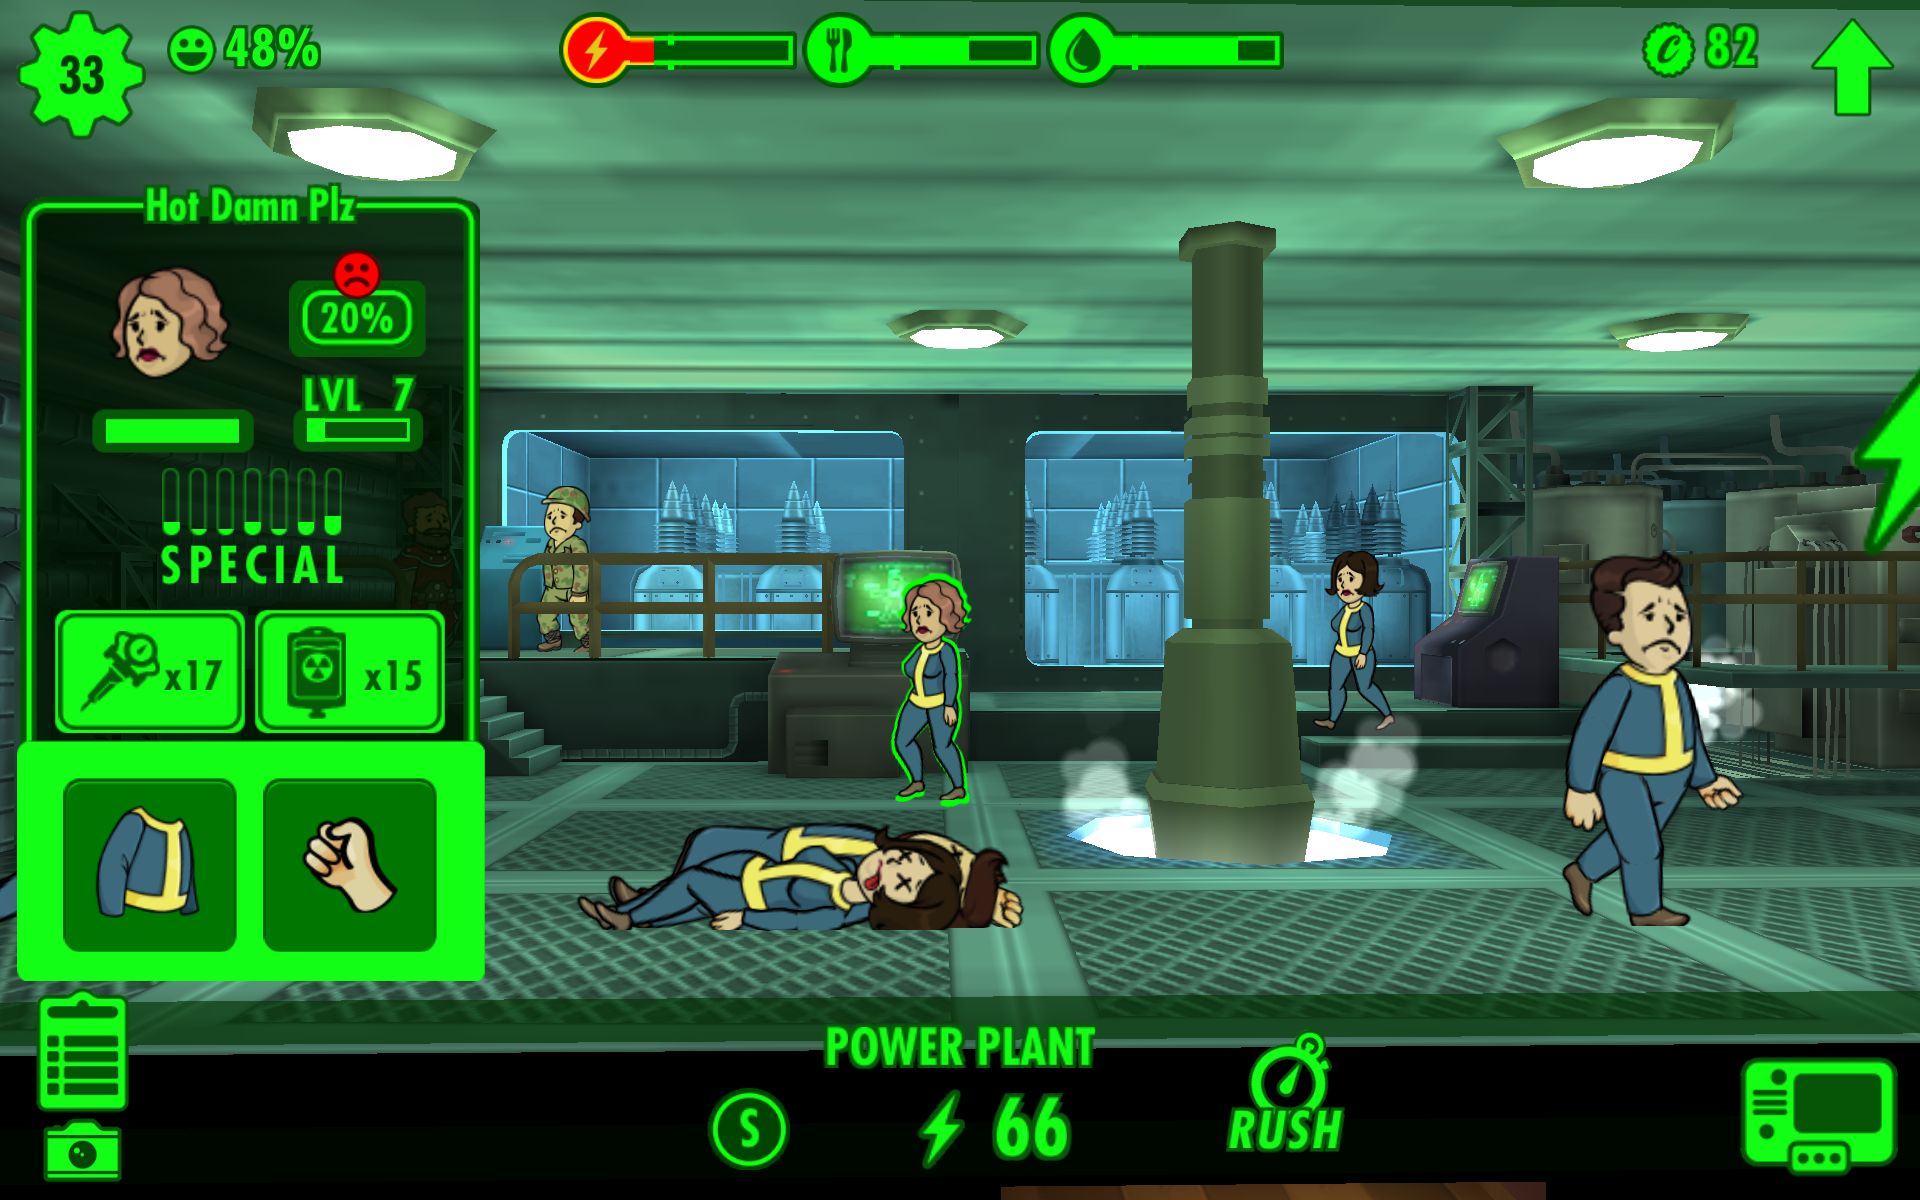 max dweller level in fallout shelter